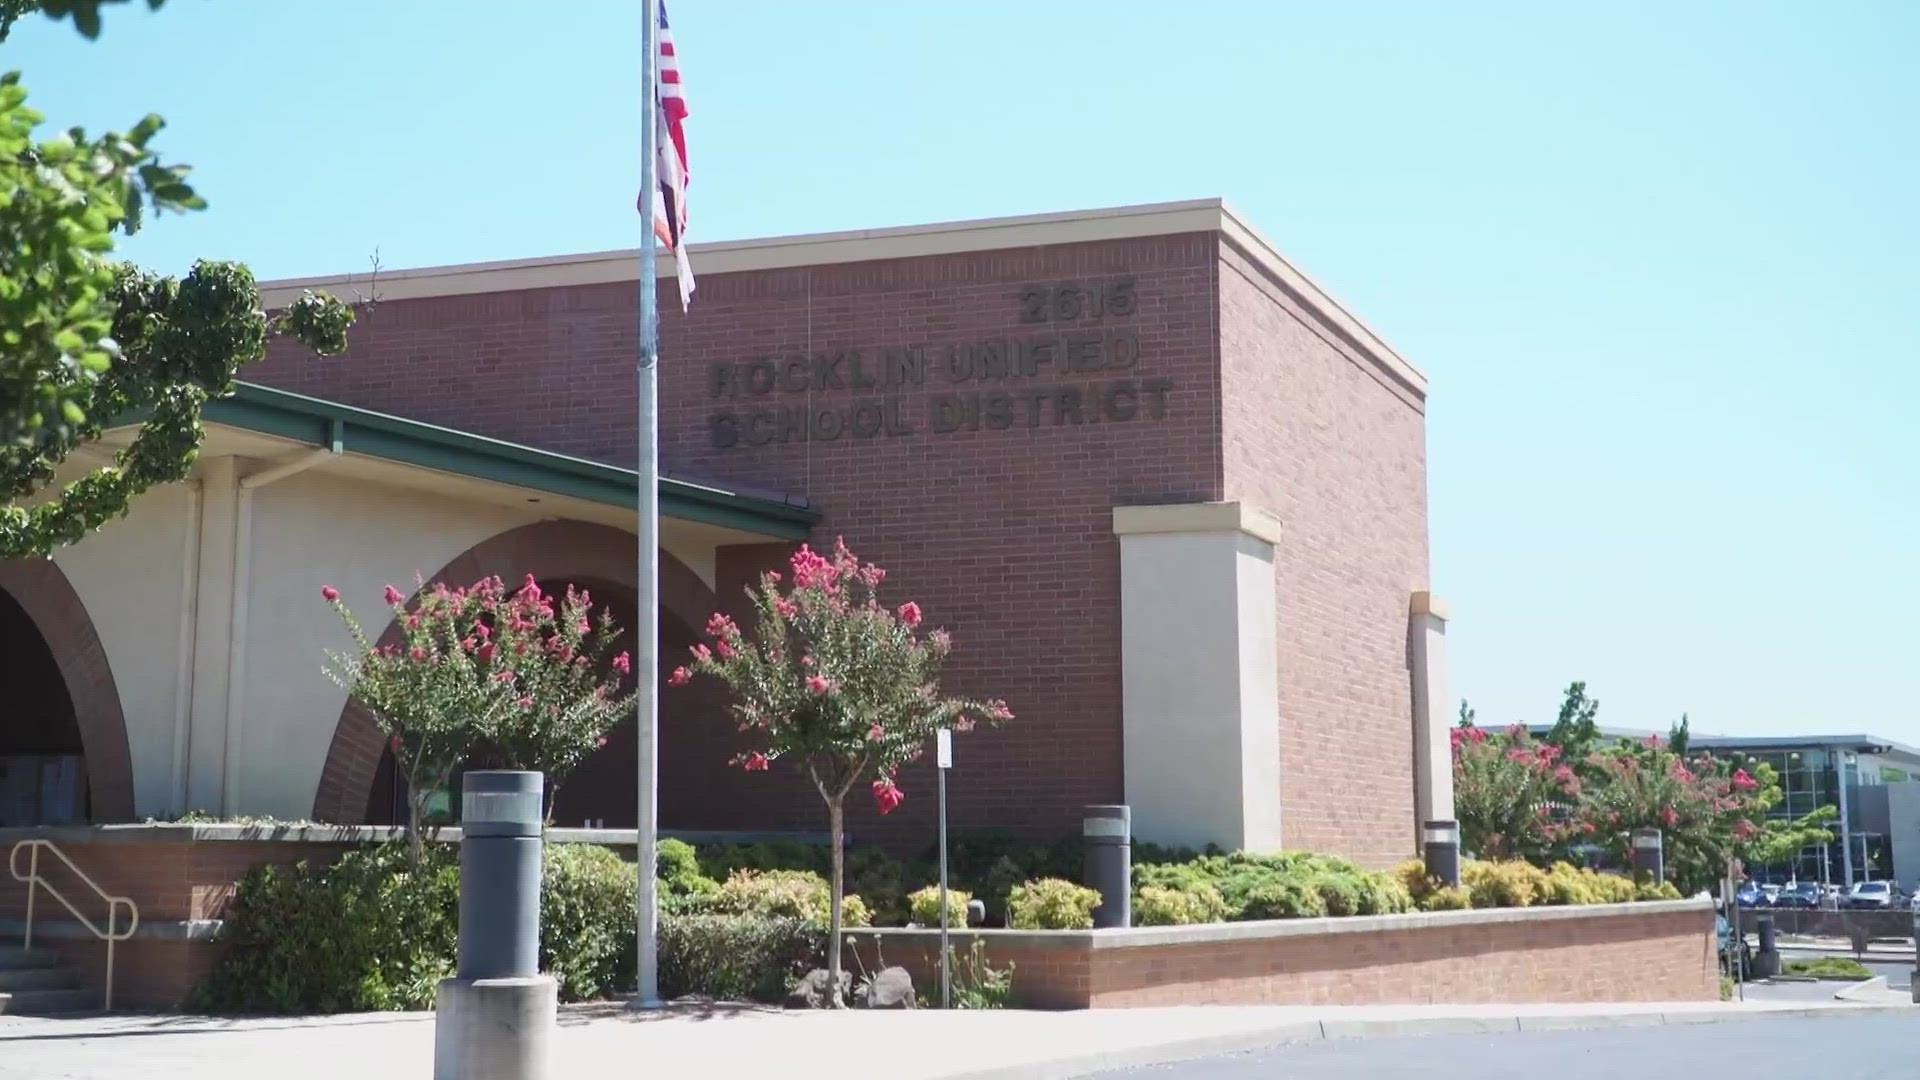 Rocklin parents voice concerns over school board controversy about new policy committees